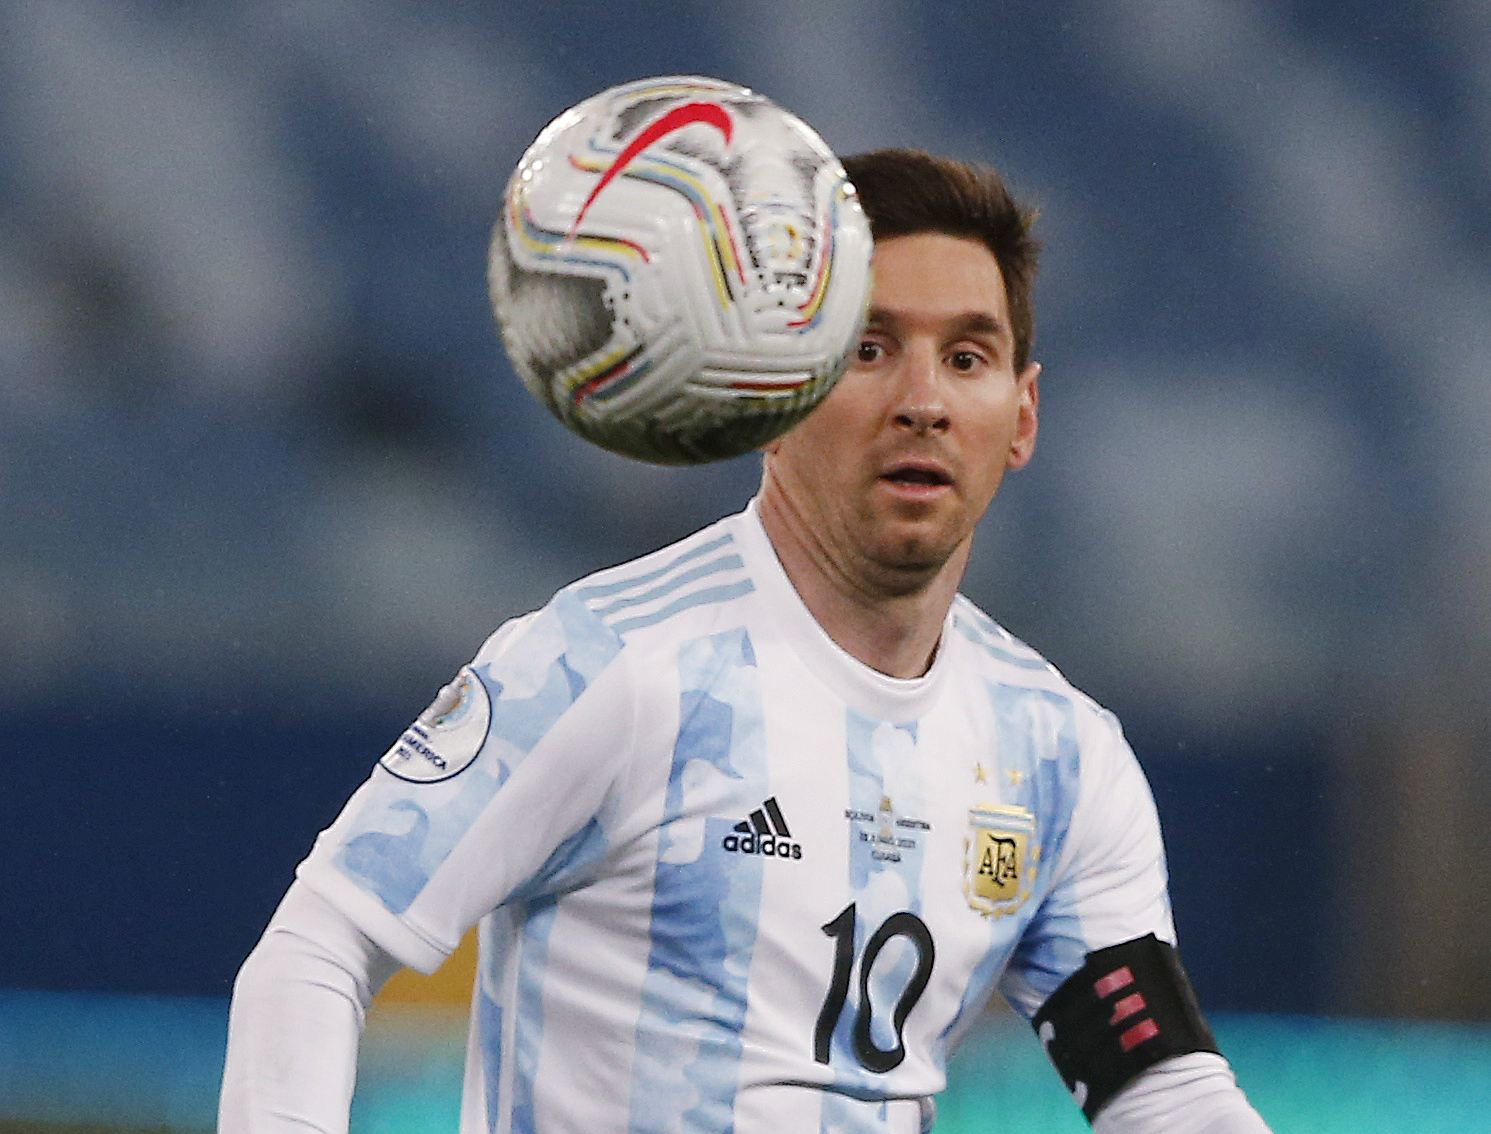 Soccer Football - Copa America 2021 - Group A - Bolivia v Argentina - Arena Pantanal, Cuiaba, Brazil - June 28, 2021 Argentina's Lionel Messi in action REUTERS/Rodolfo Buhrer